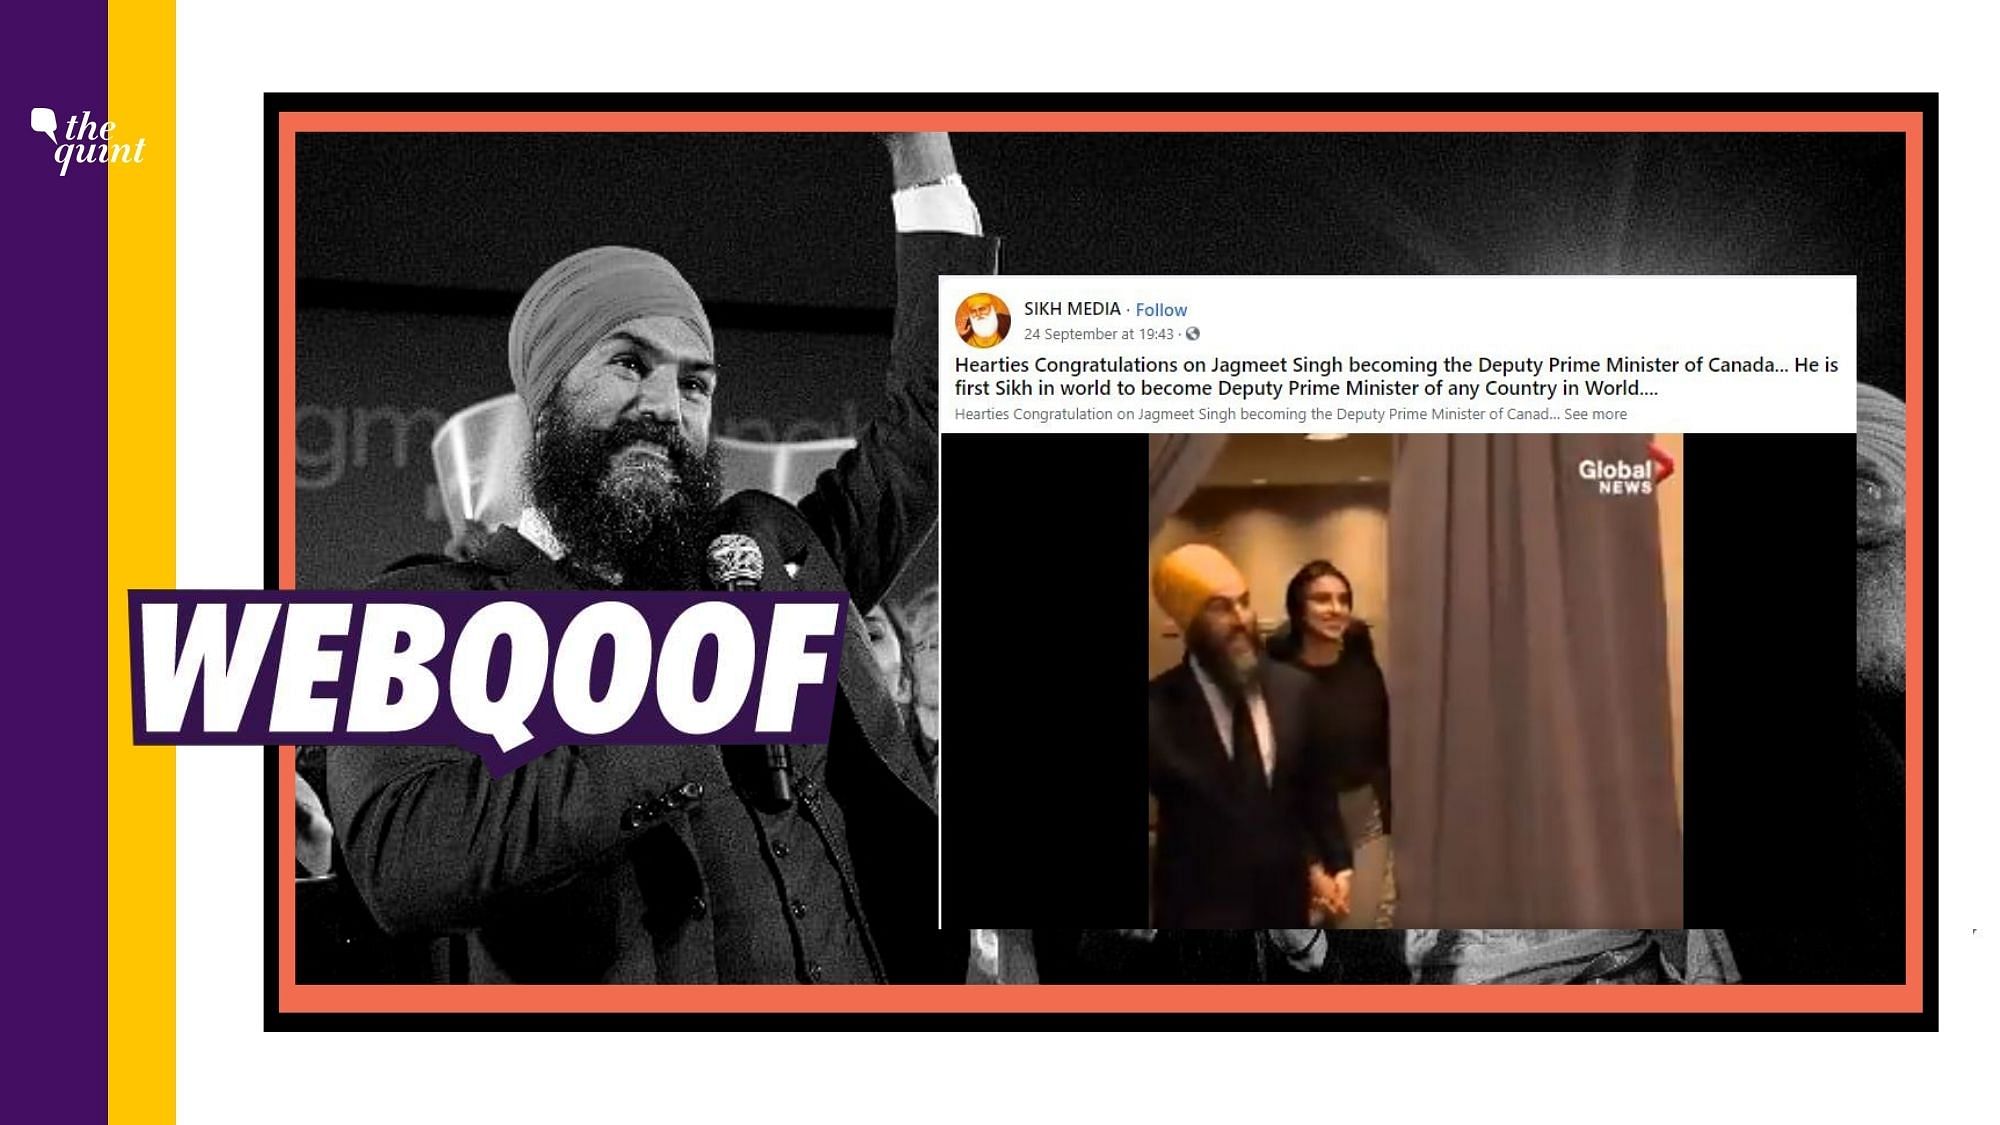 A viral set of videos and photos are being shared to claim that Jagmeet Singh has been appointed as the Deputy Prime Minister of Canada.